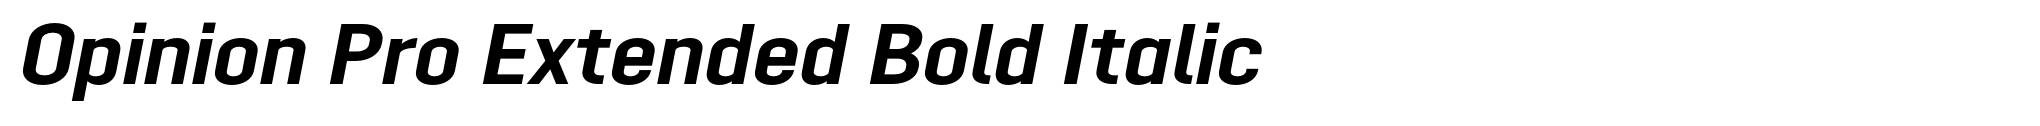 Opinion Pro Extended Bold Italic image